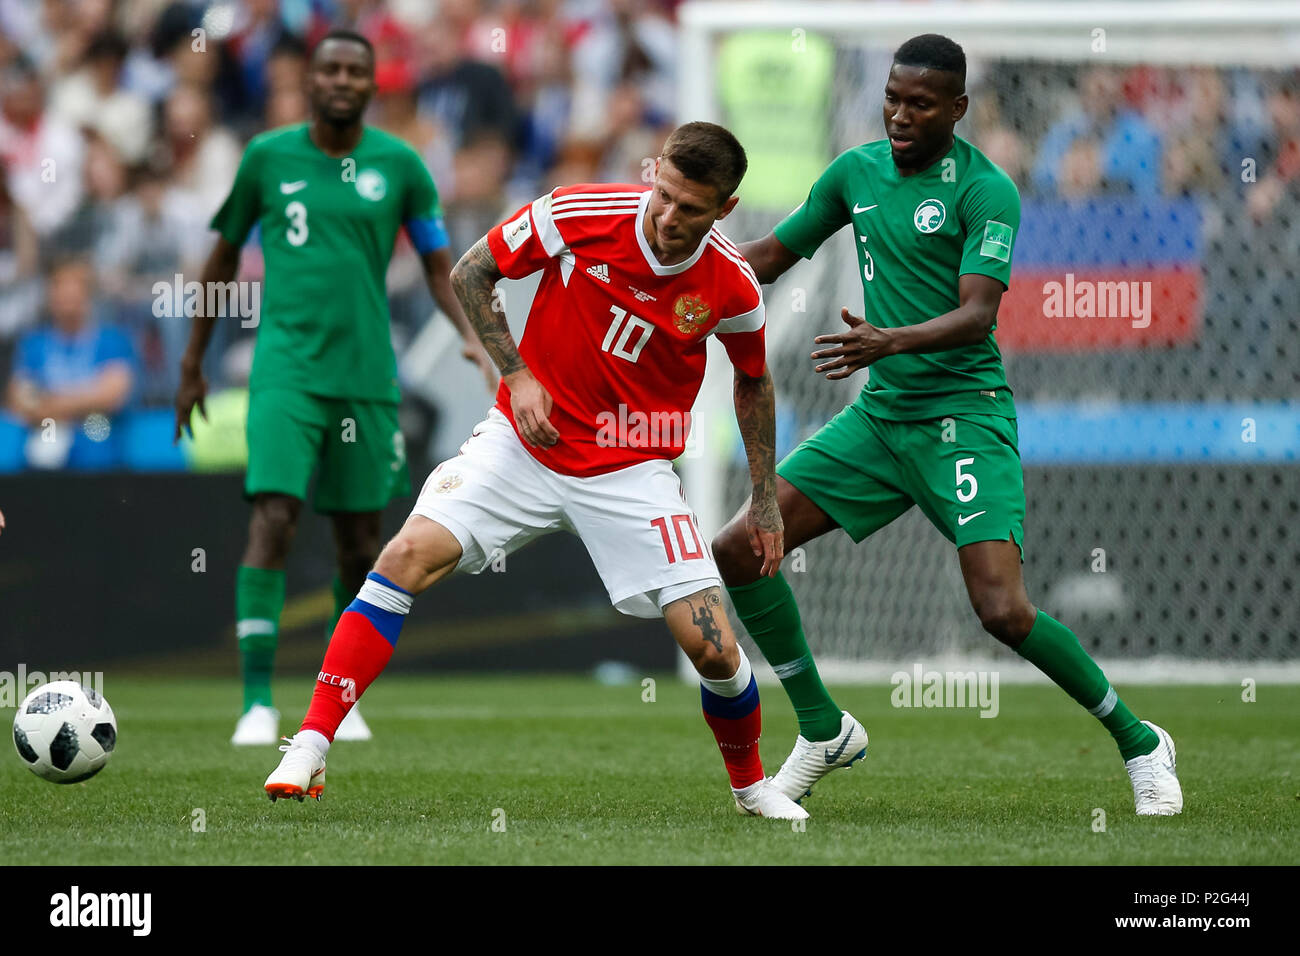 Moscow, Russia. 14th June 2018. Fedor Smolov of Russia and Omar Hawsawi of Saudi Arabia during the 2018 FIFA World Cup Group A match between Russia and Saudi Arabia at Luzhniki Stadium on June 14th 2018 in Moscow, Russia. Credit: PHC Images/Alamy Live News Stock Photo